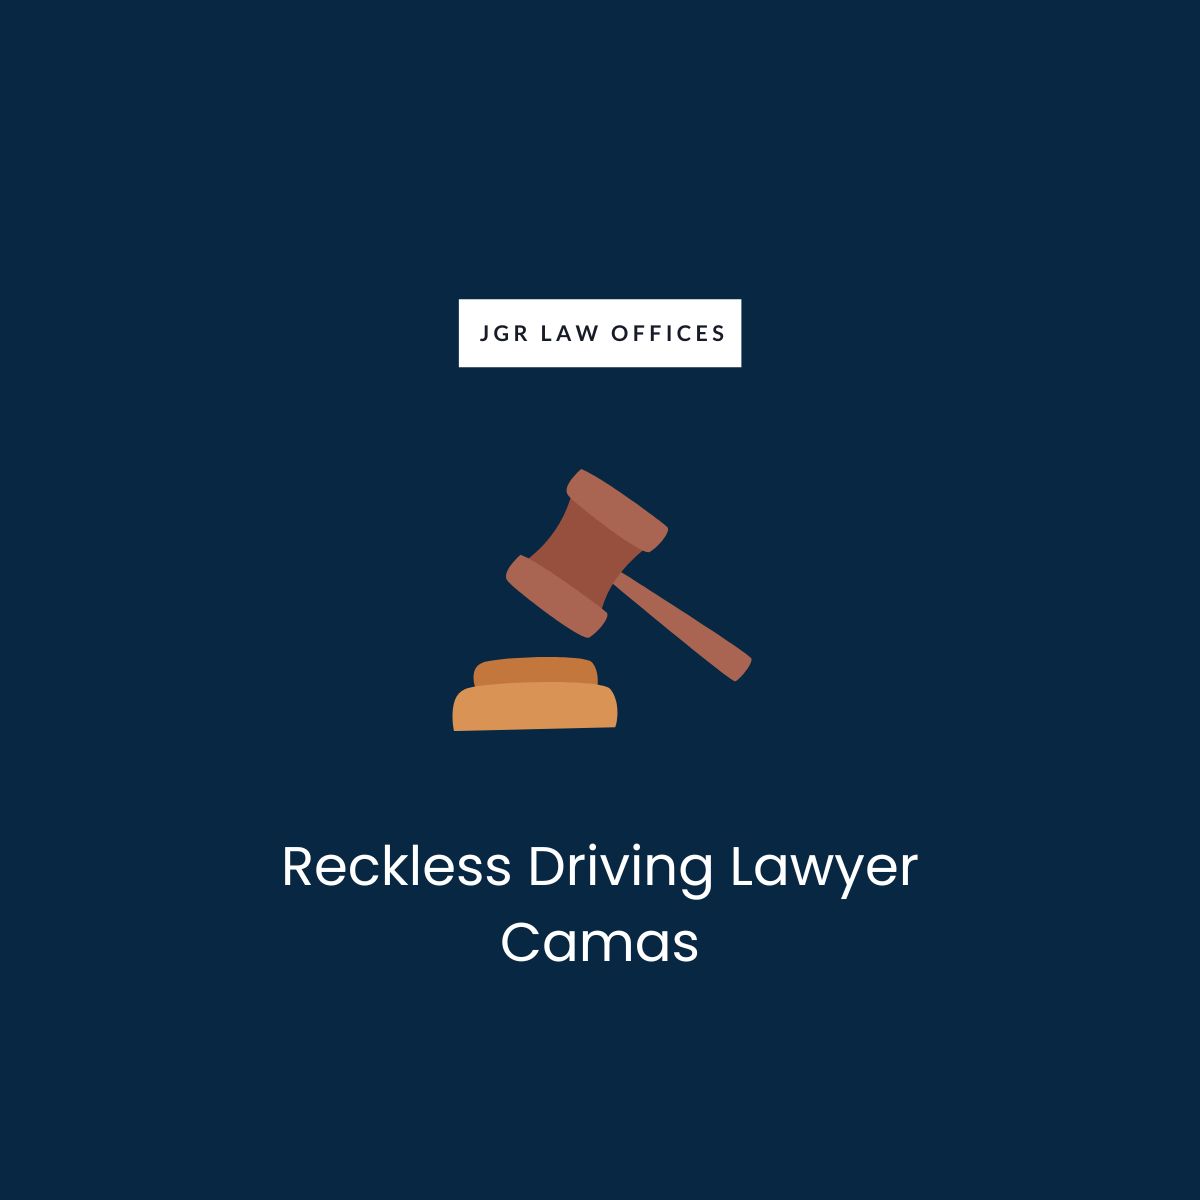 Reckless Driving Lawyer Camas Reckless Driving Reckless Driving